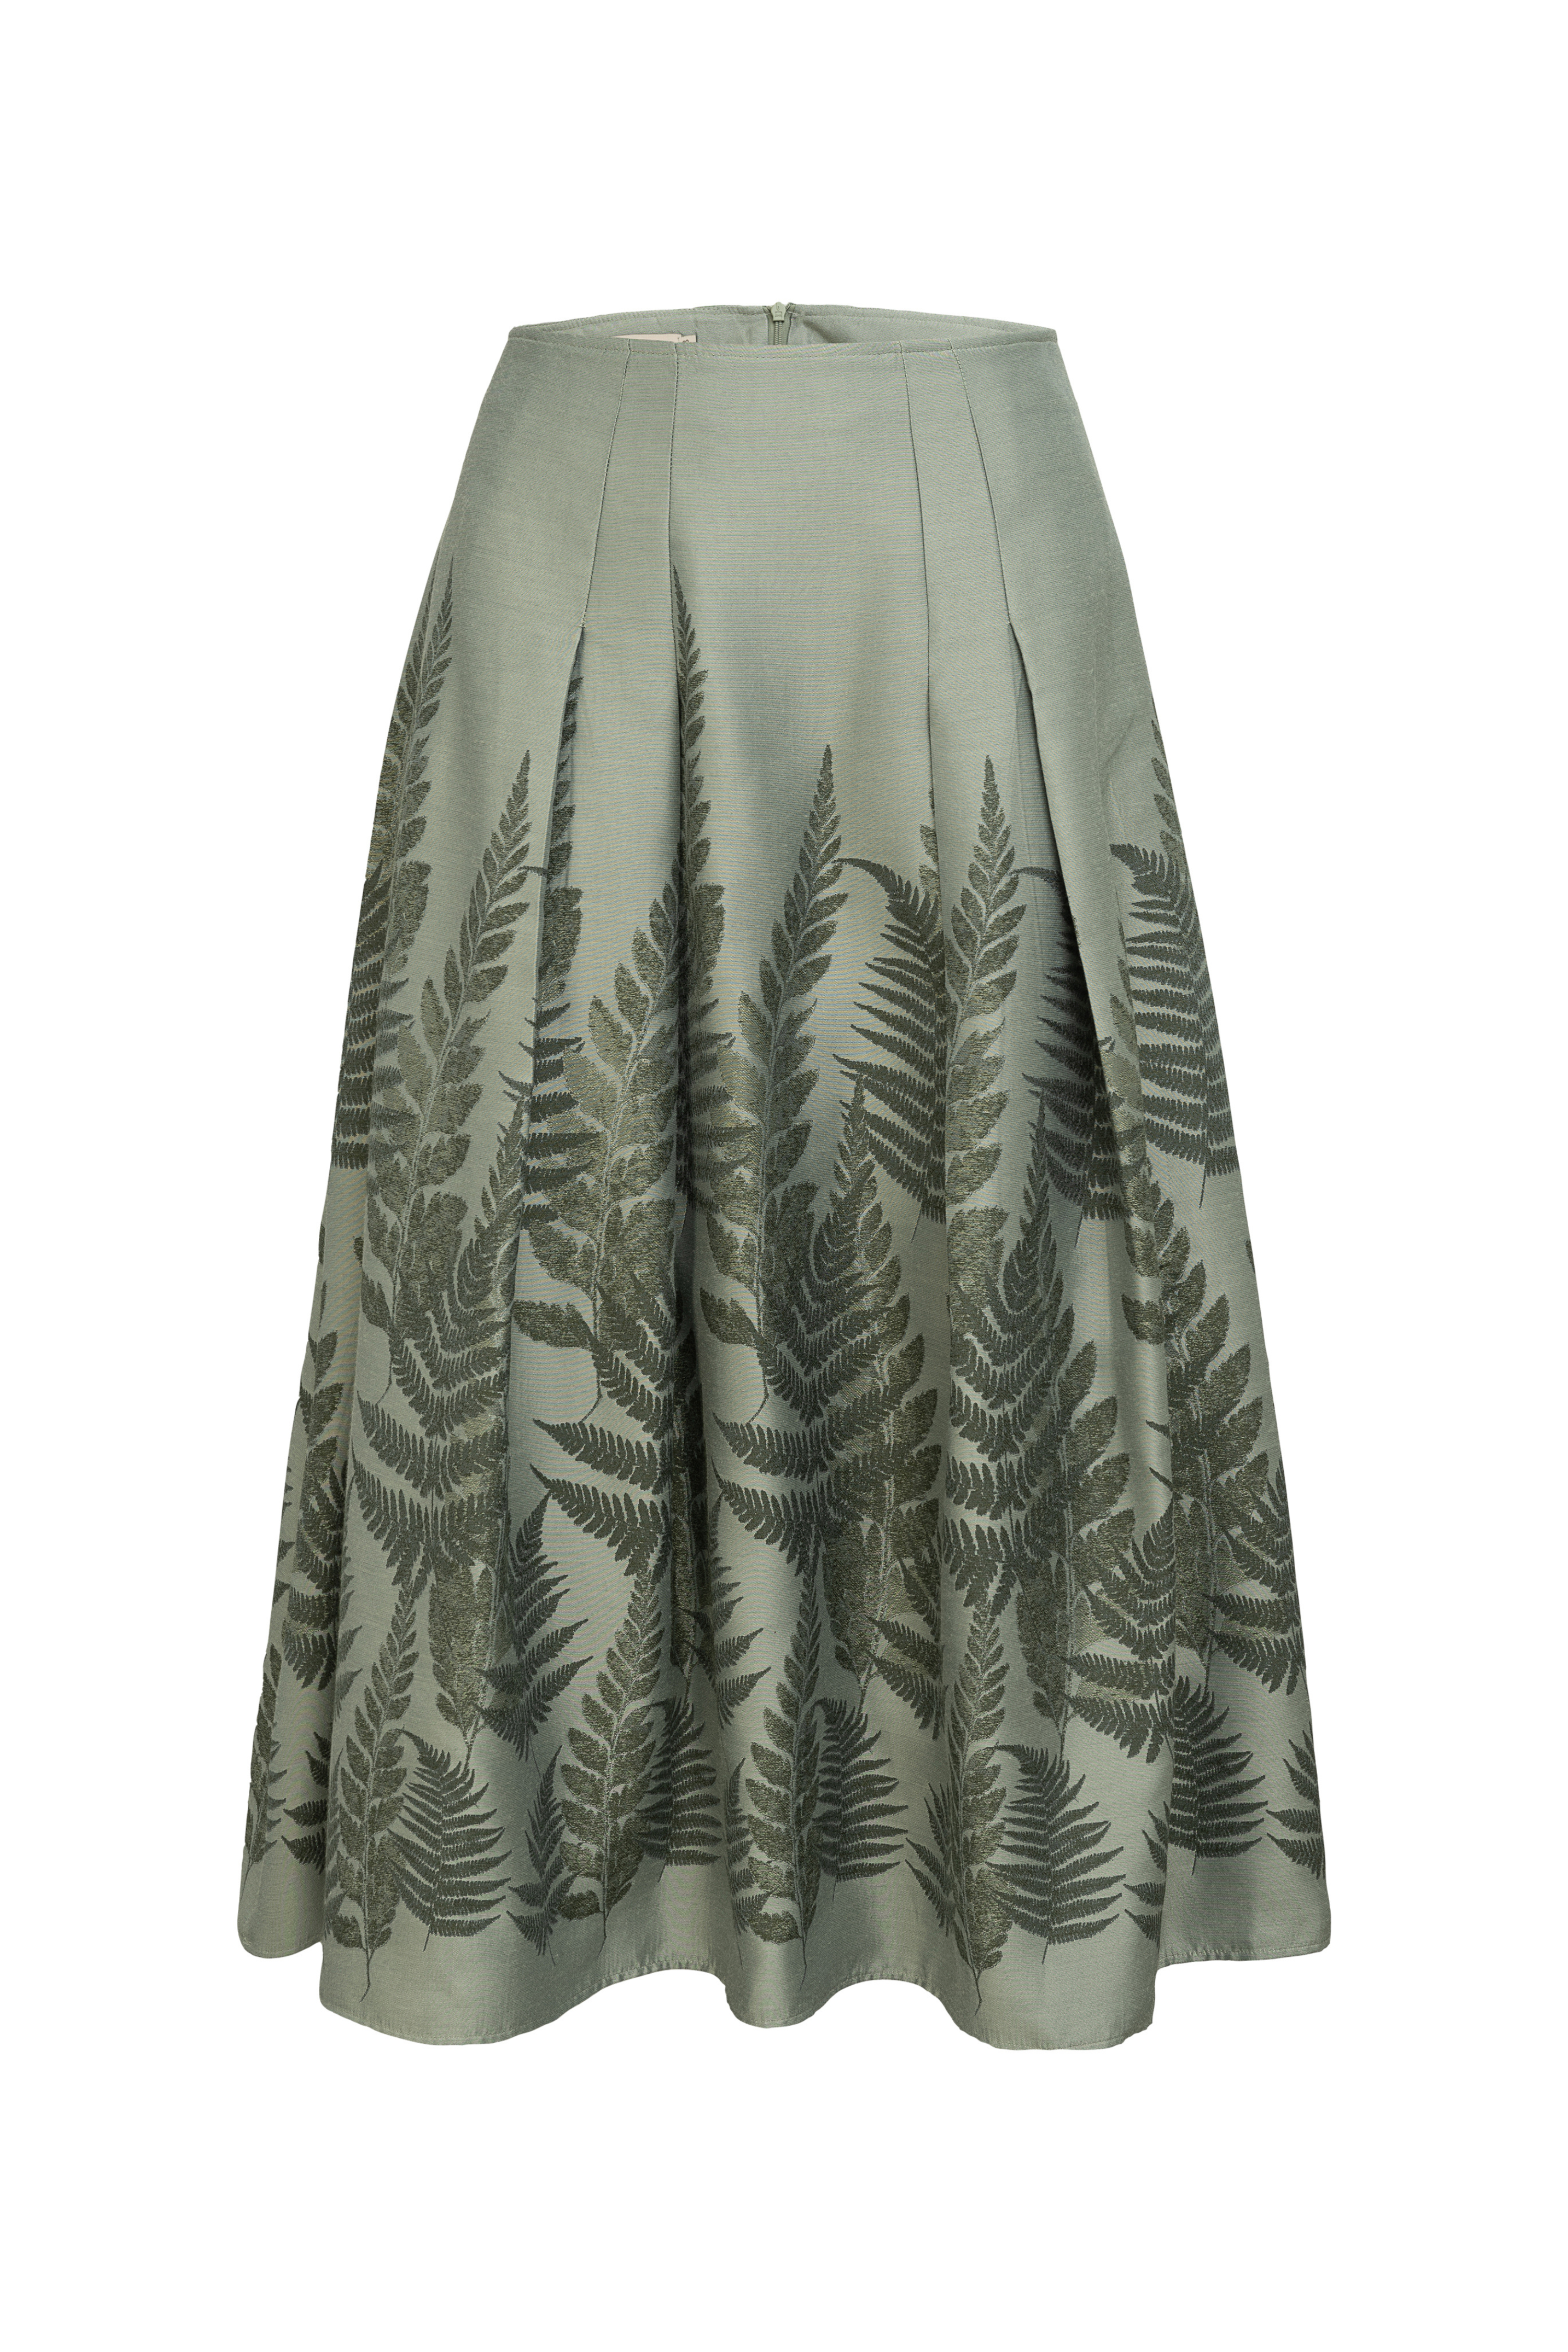 Jacquard skirt with ferns